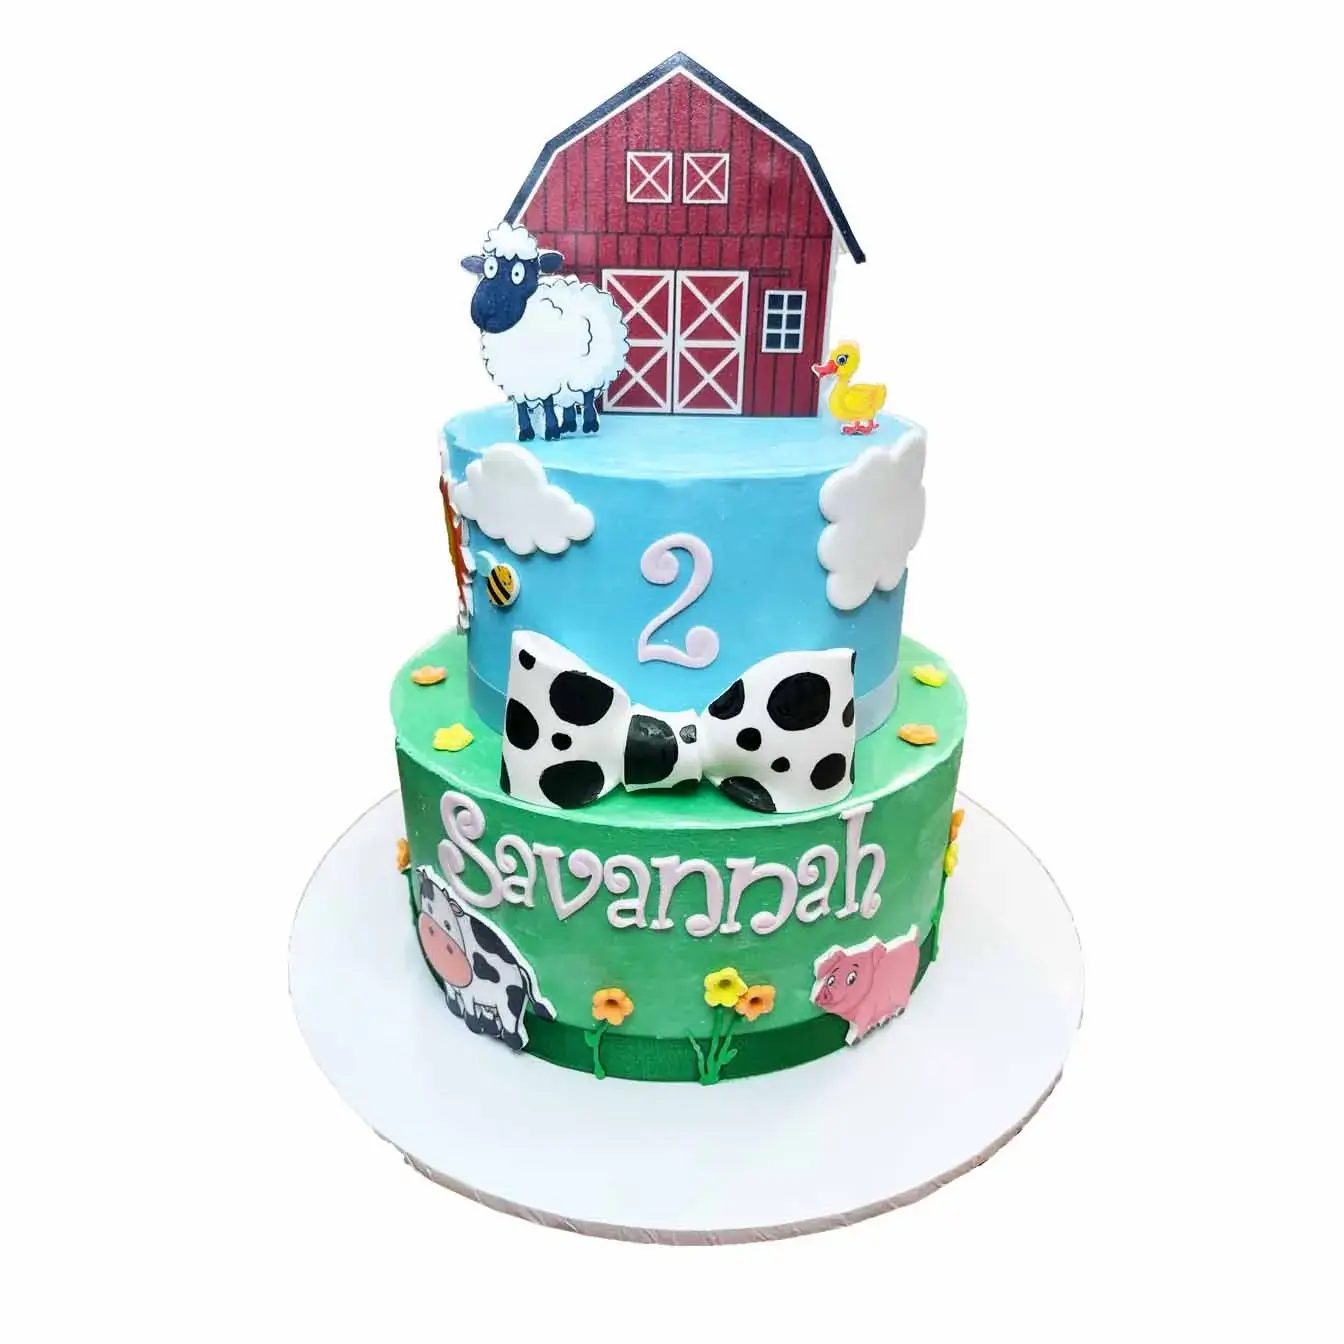 Barnyard Fun Birthday Cake - A 2-tier cake with a red barn on top and whimsical farmyard animals, a playful centerpiece for barnyard-themed birthday parties.